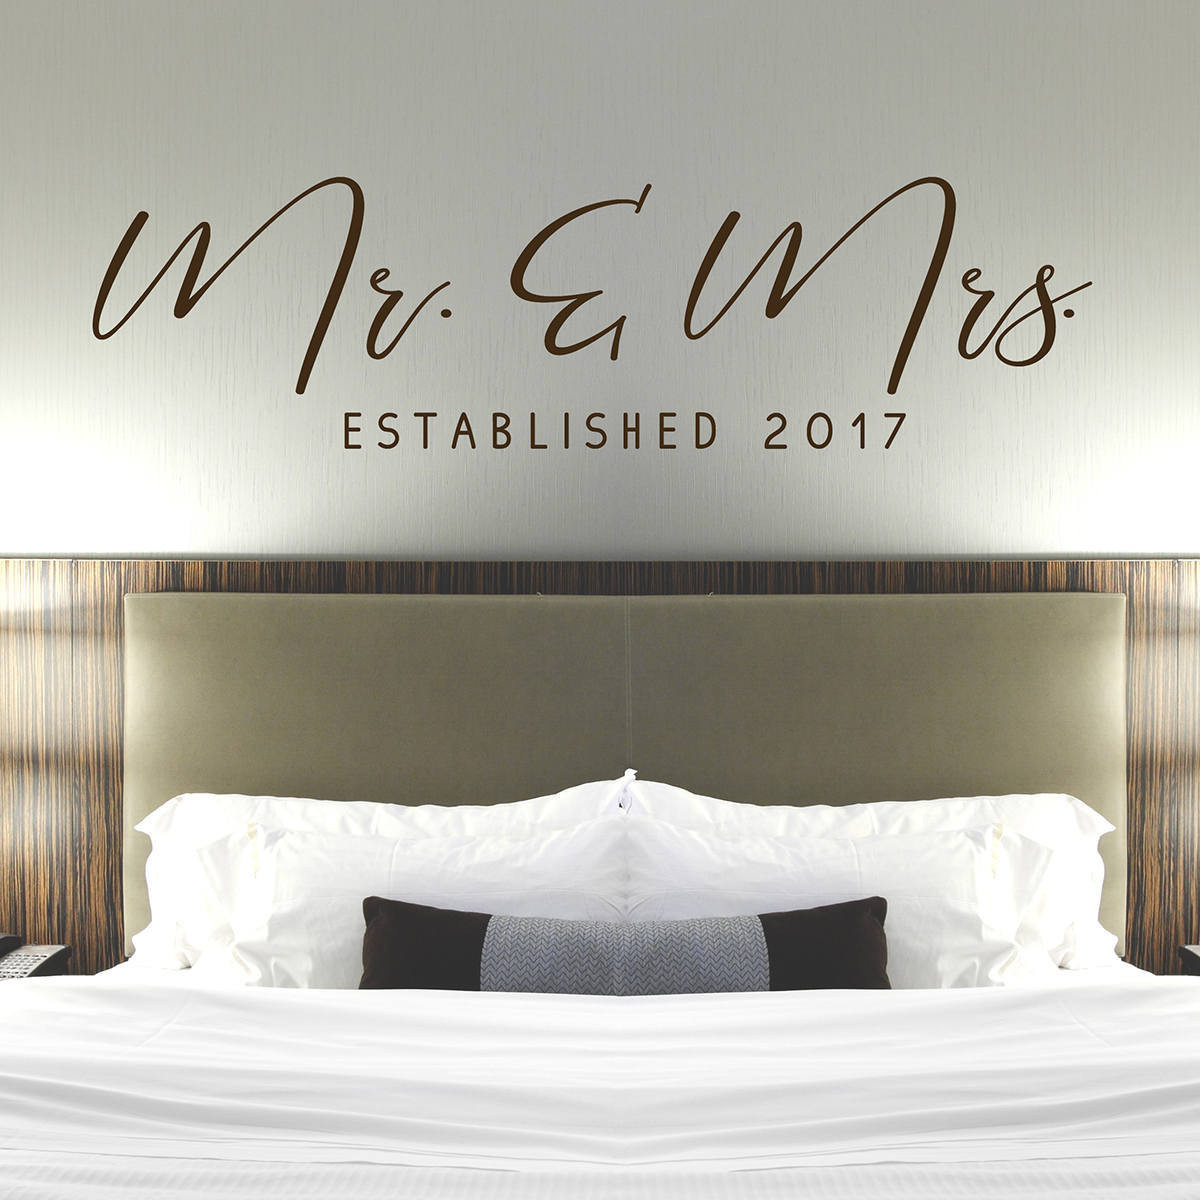 Bedroom Wall Decals
 Mr & Mrs Wall Decal Master Bedroom Wall Decor